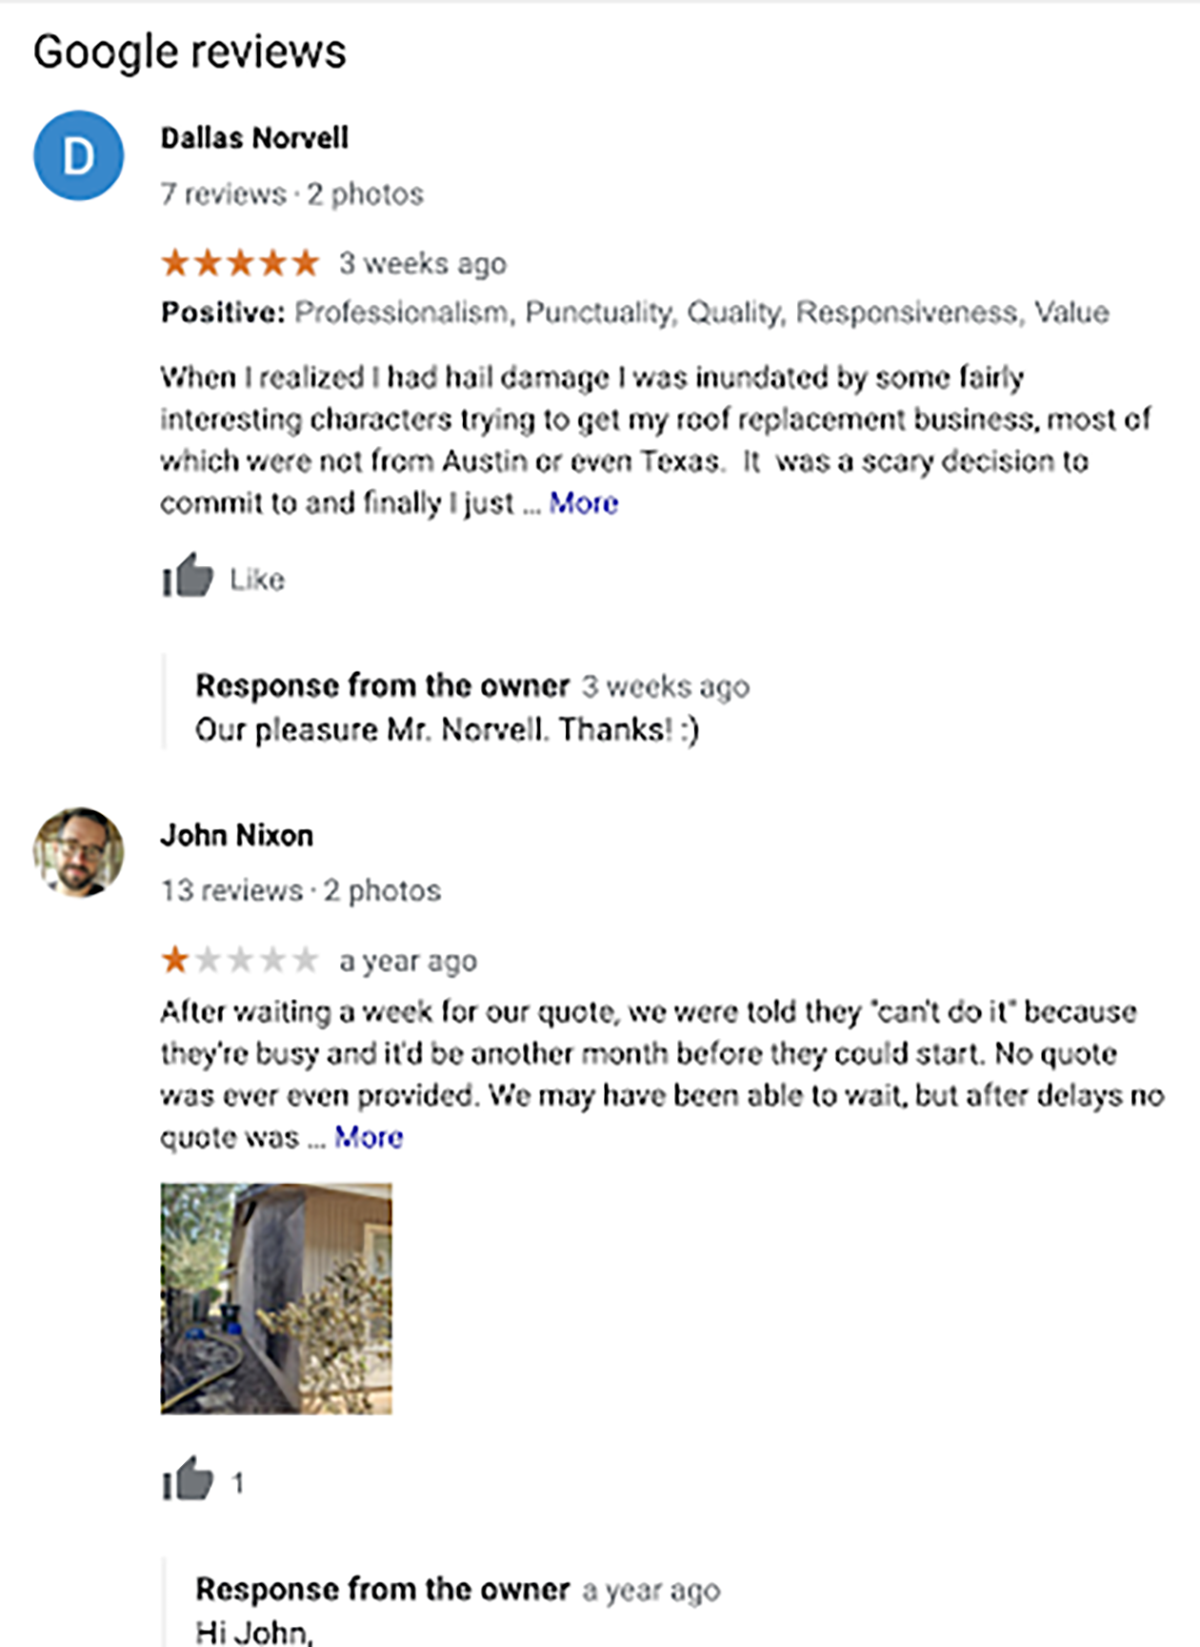 screenshot of Austin Roofing and Construction’s google reviews